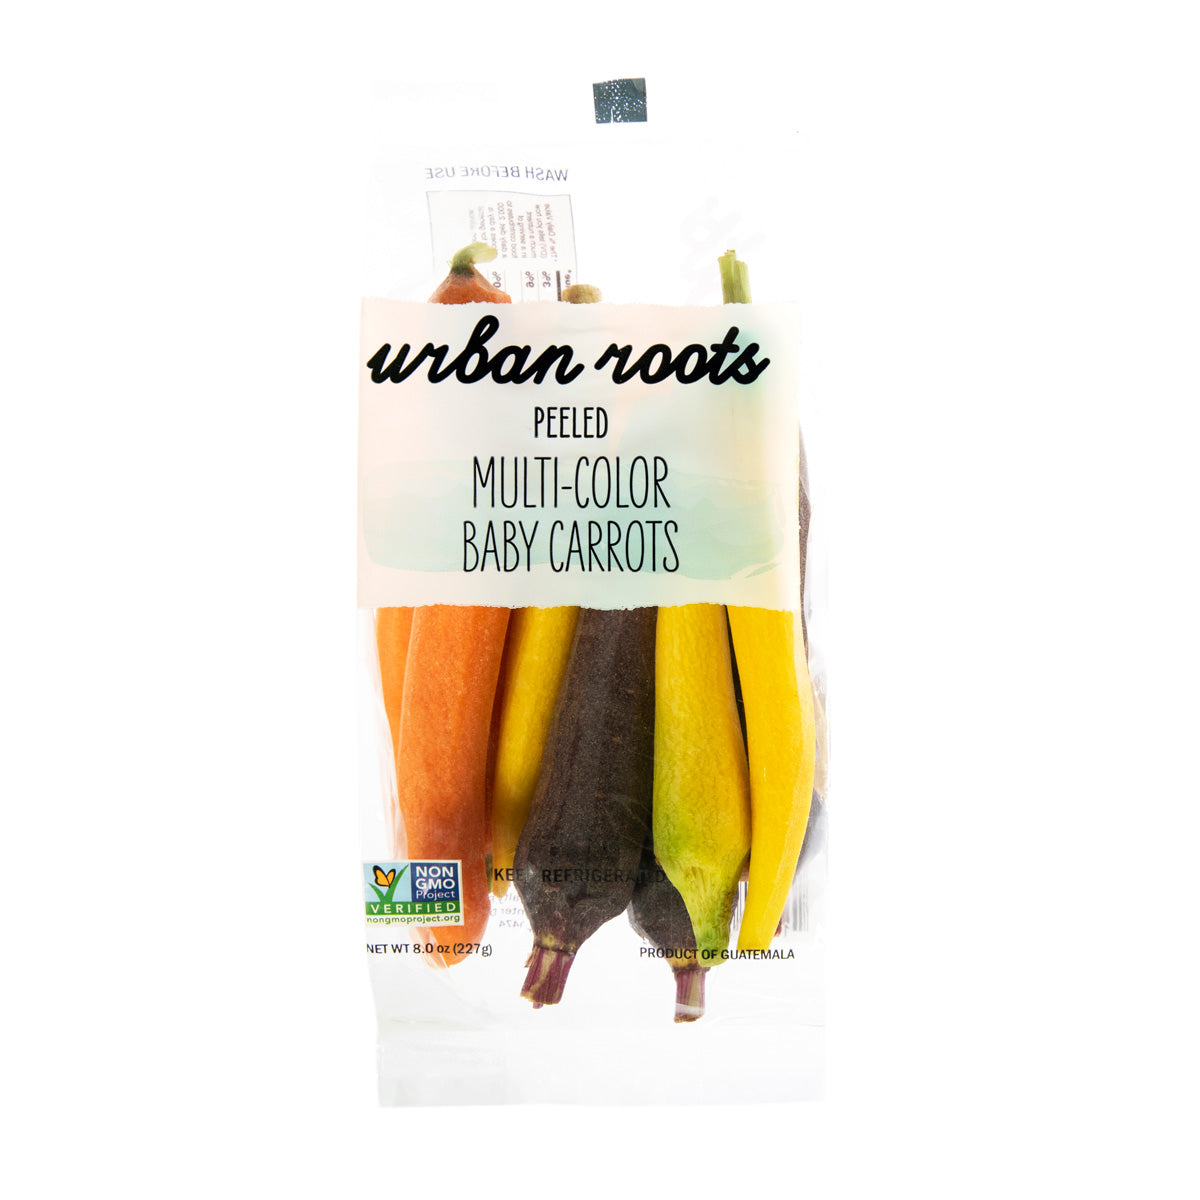 Urban Roots Peeled Multi Colored Baby Carrots 8 OZ